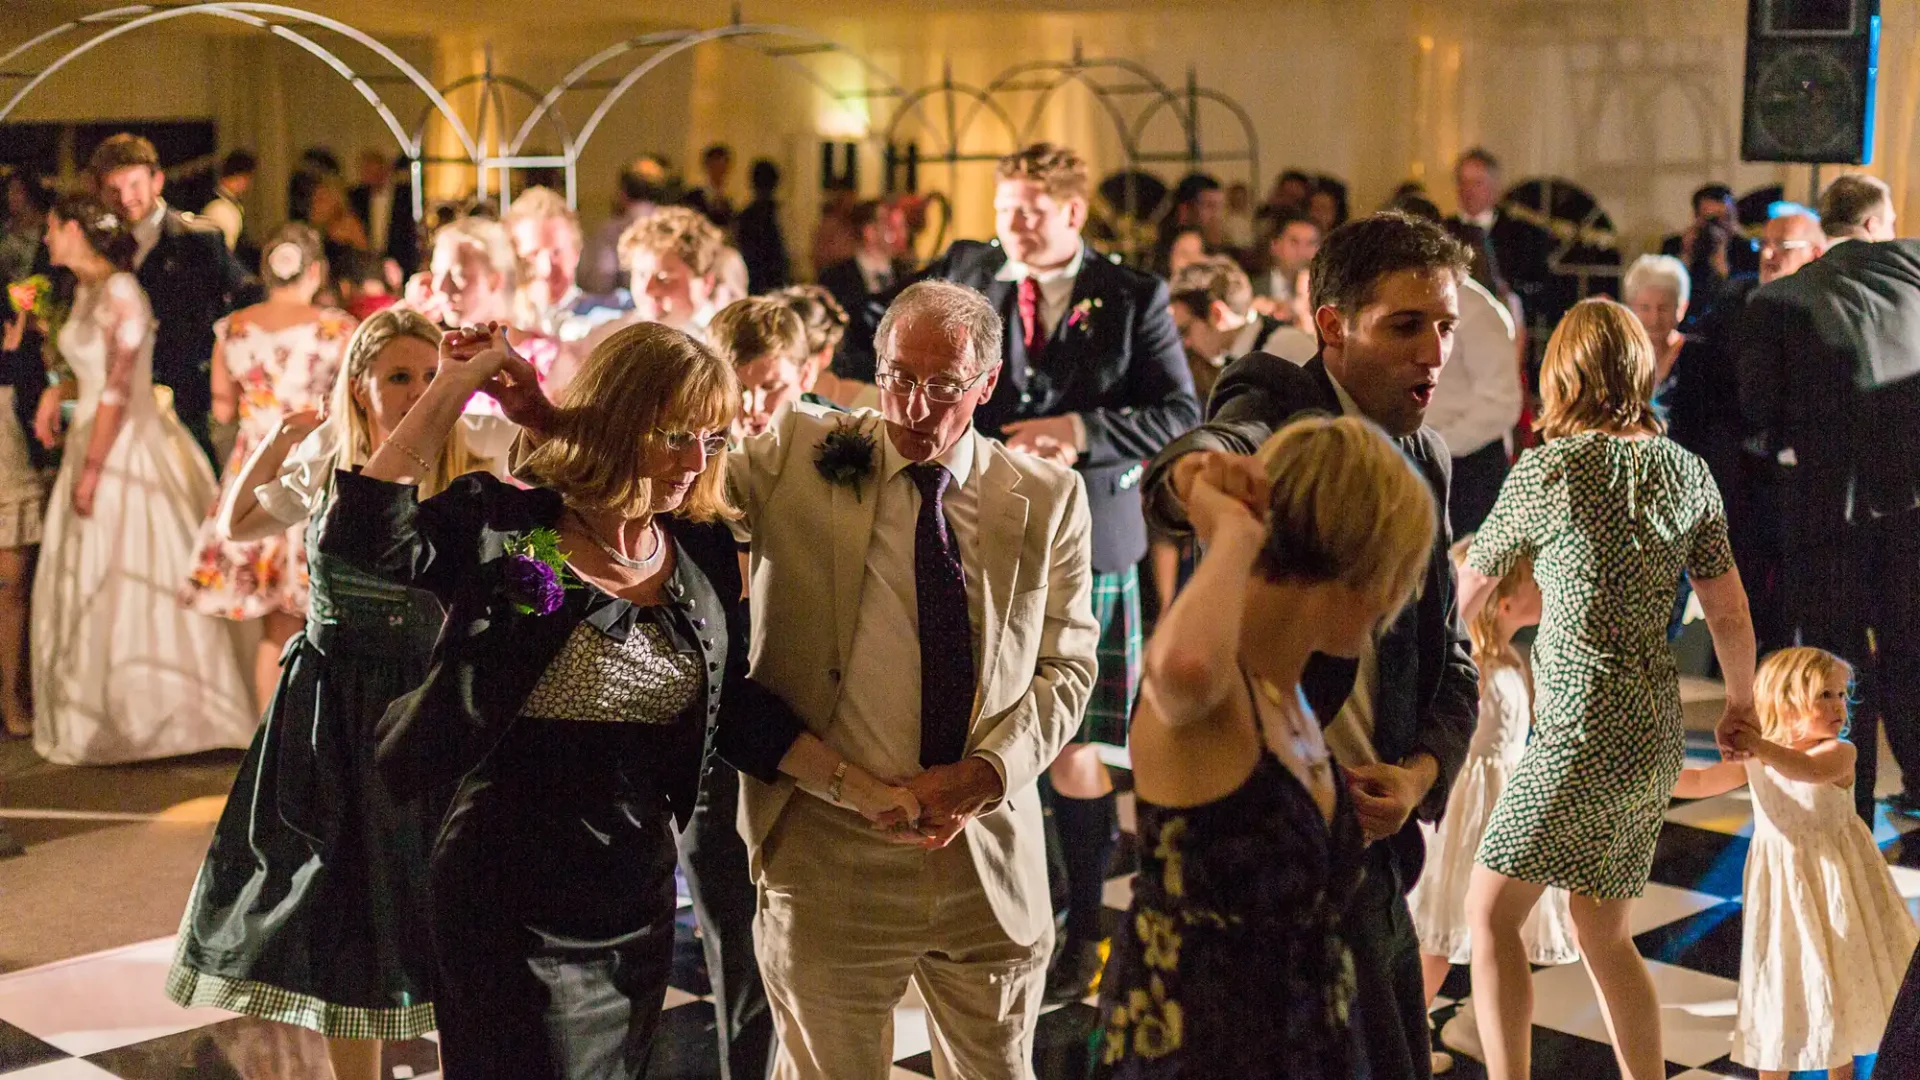 Guests dancing at a lively evening wedding reception, with various couples and individuals of different ages interacting on the dance floor.